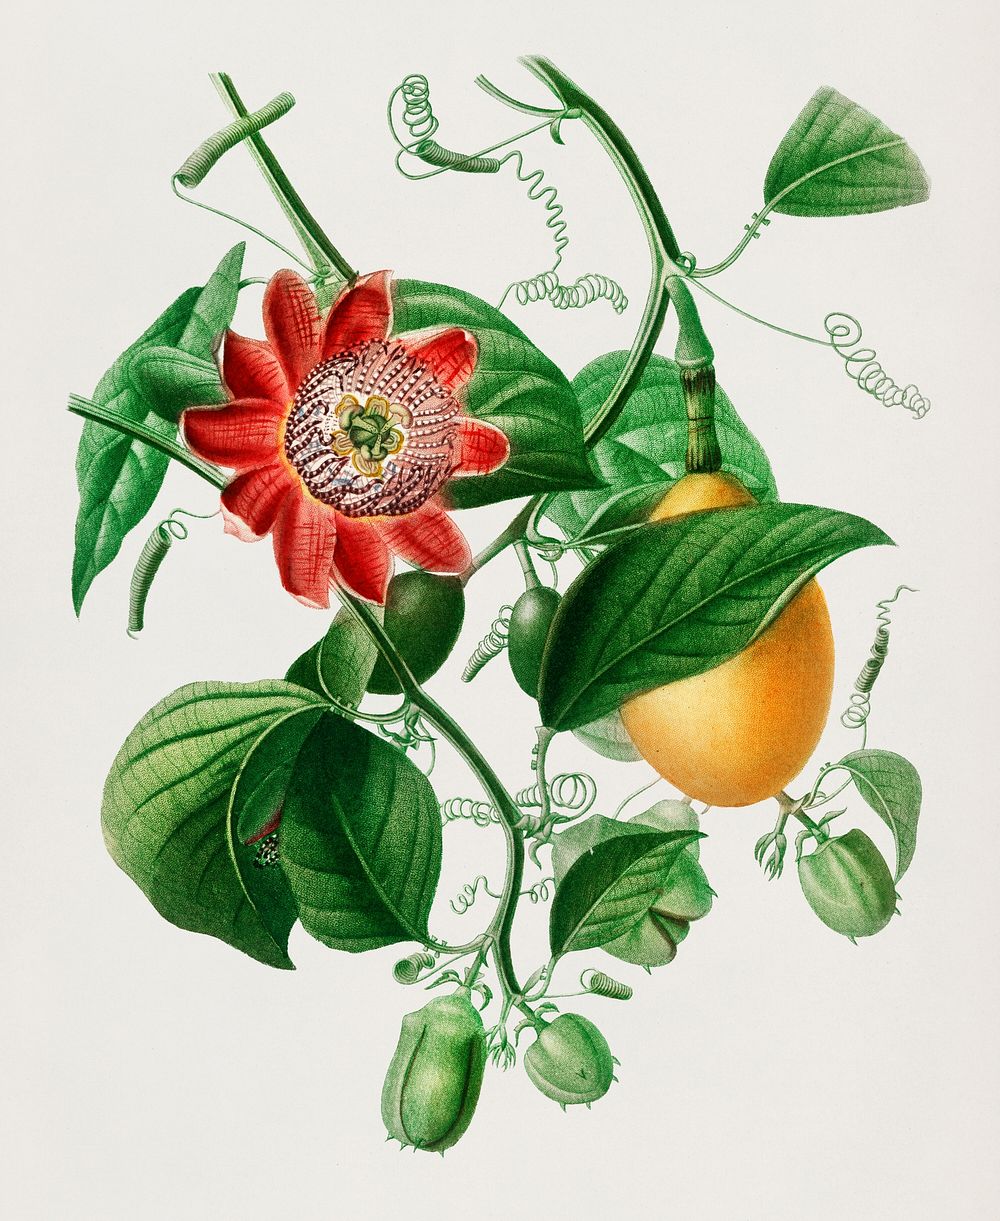 Passiflore ailee illustrated by Charles Dessalines D' Orbigny (1806-1876). Digitally enhanced from our own 1892 edition of…